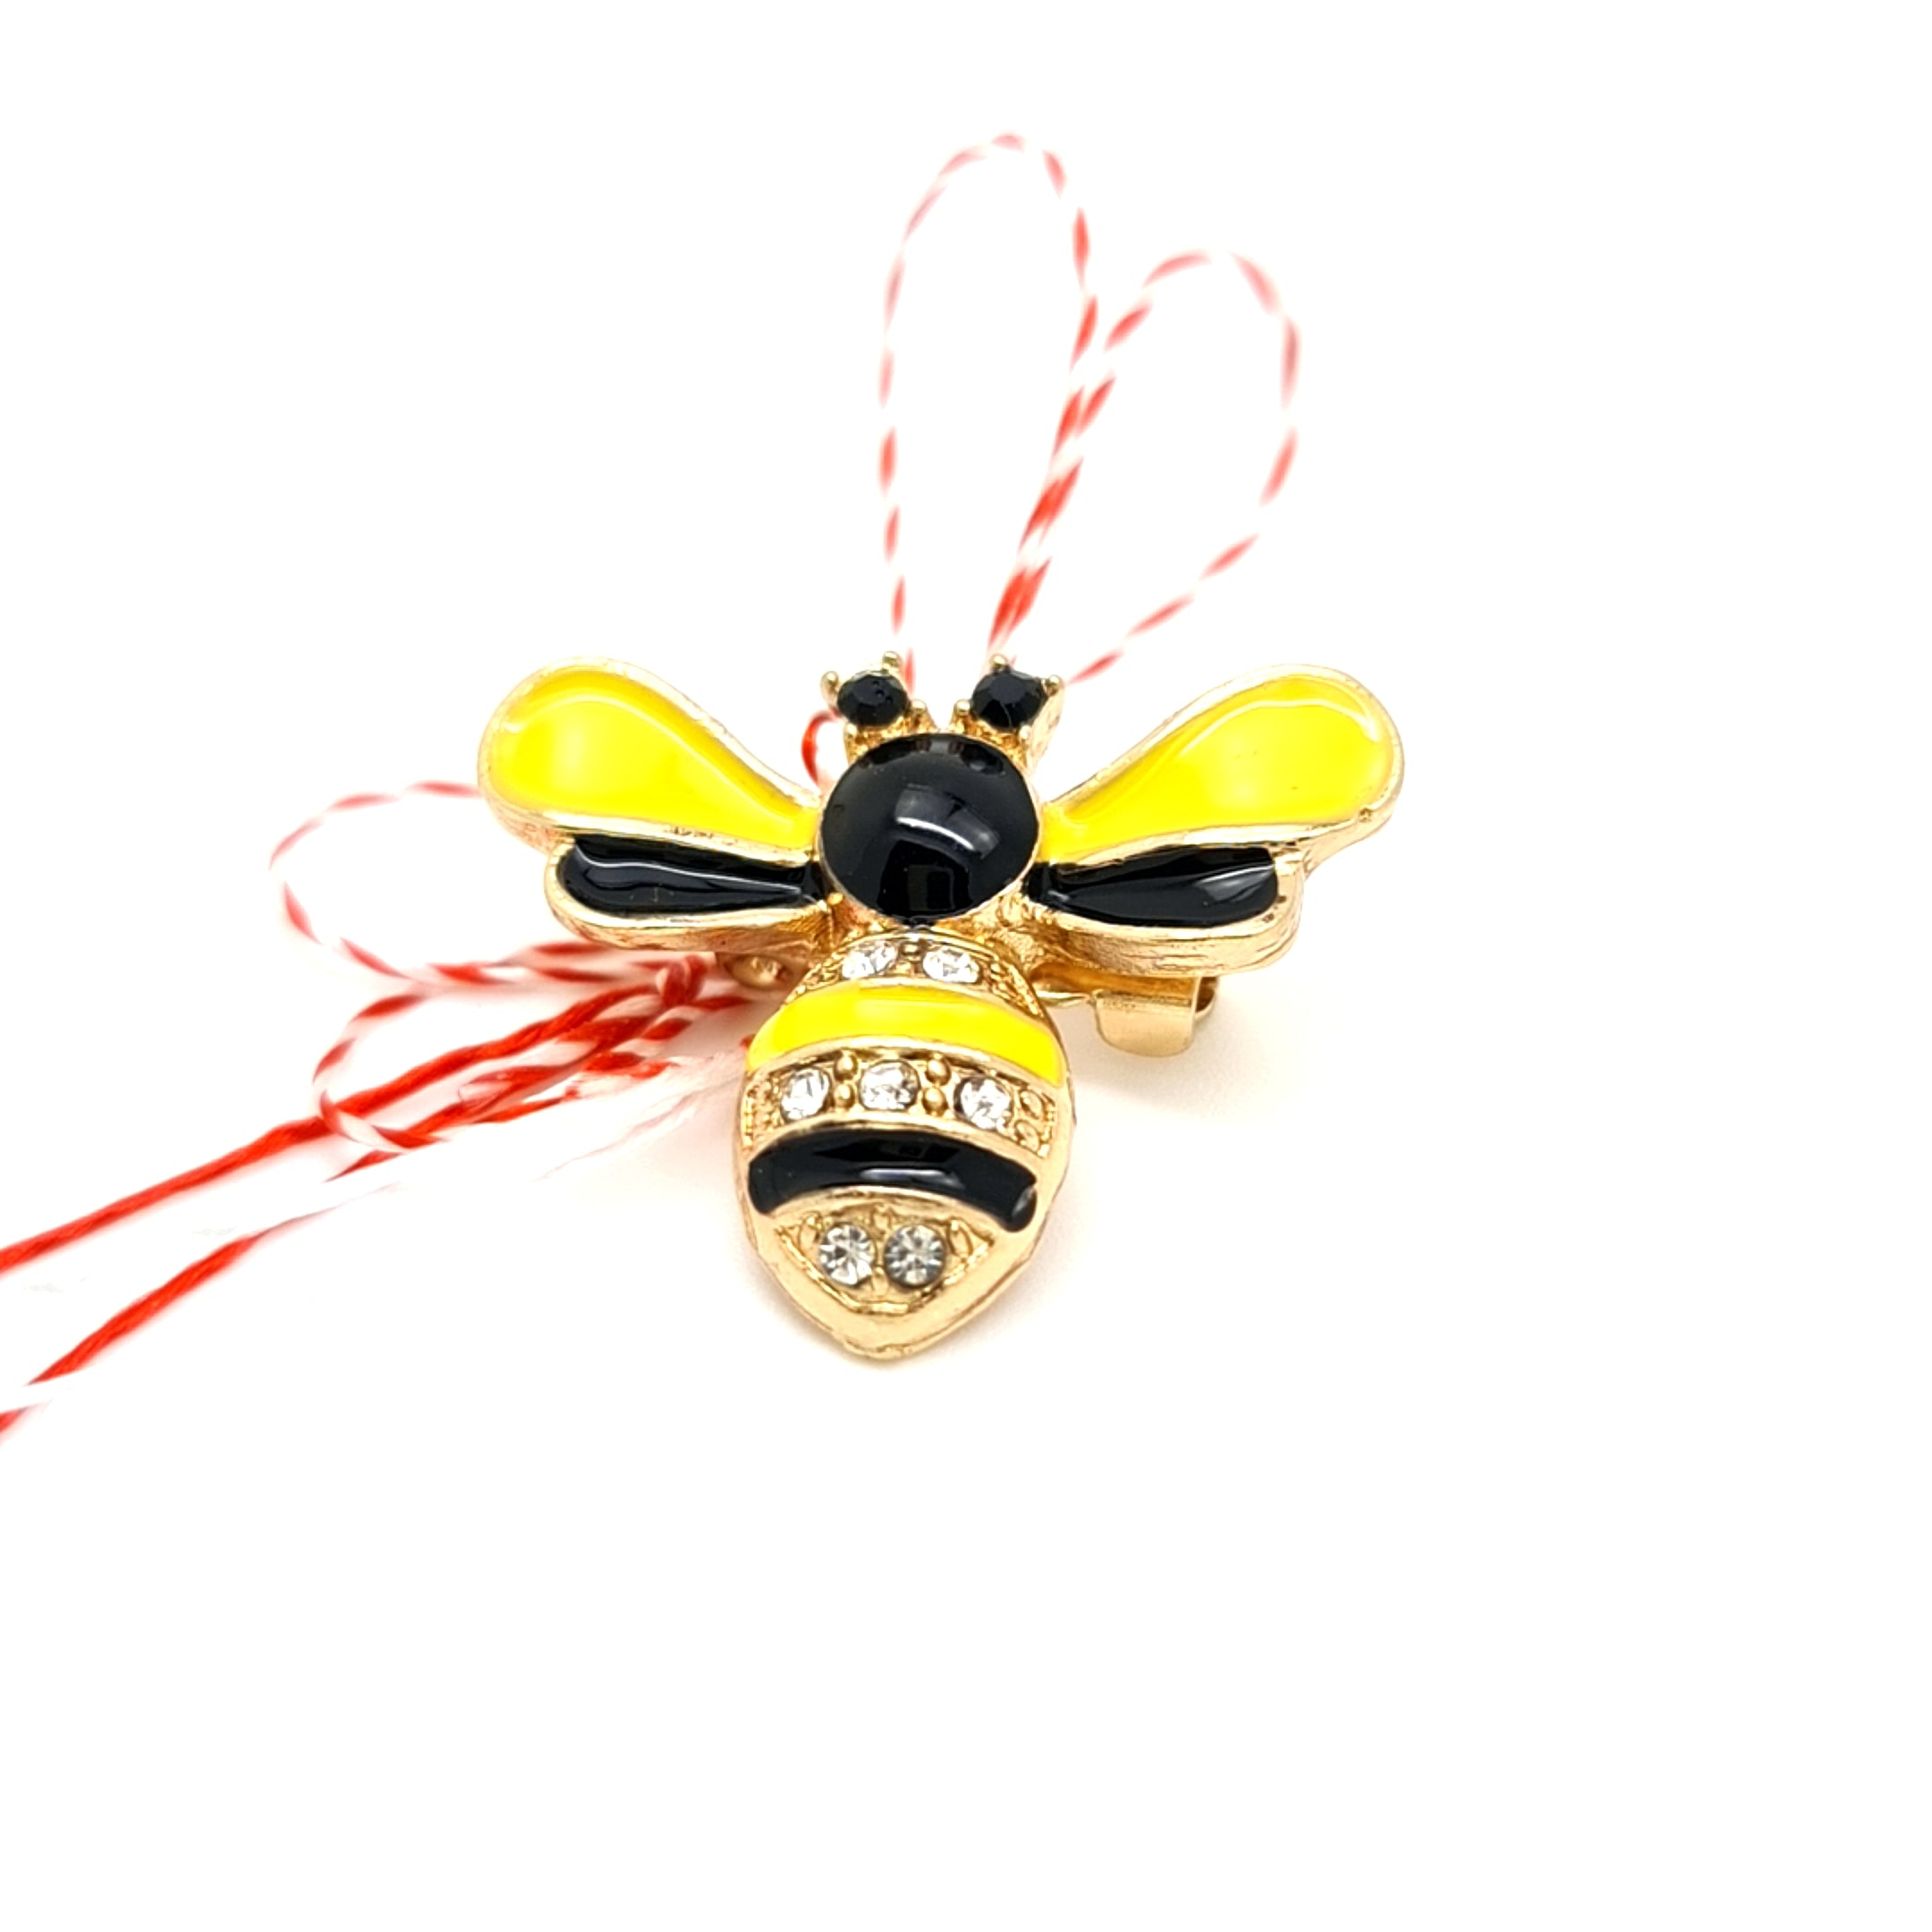 Enamel Bumblebee Martisor Brooch in Yellow with Gold Plating and Crystal Details, Tied with Red and White Martisor String.